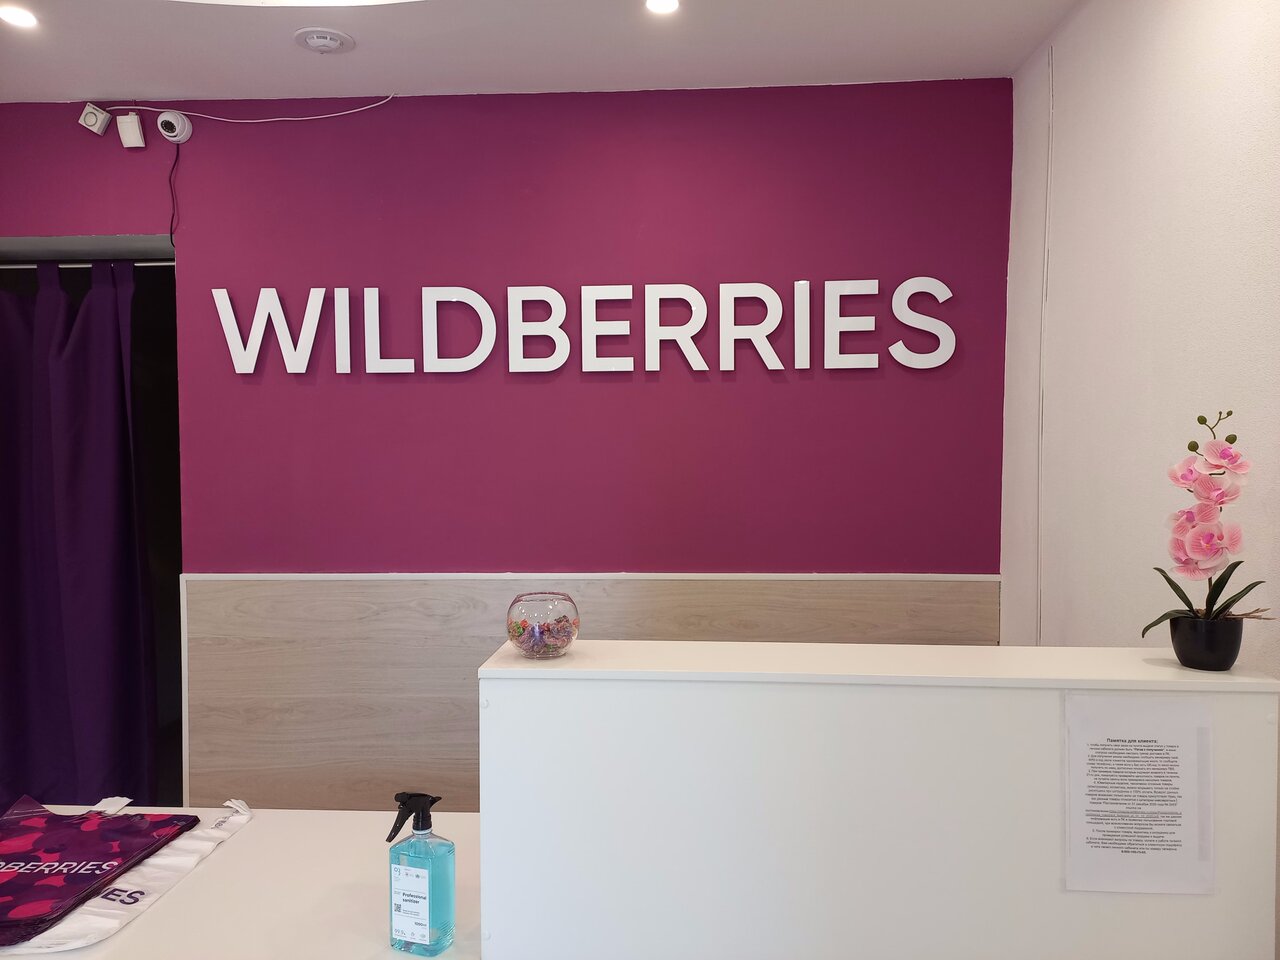 Https wildberries delivery. Wildberries вывеска. Вывеска Wildberries новая. Вывеска Wildberries объемная. Wildberries реклама.